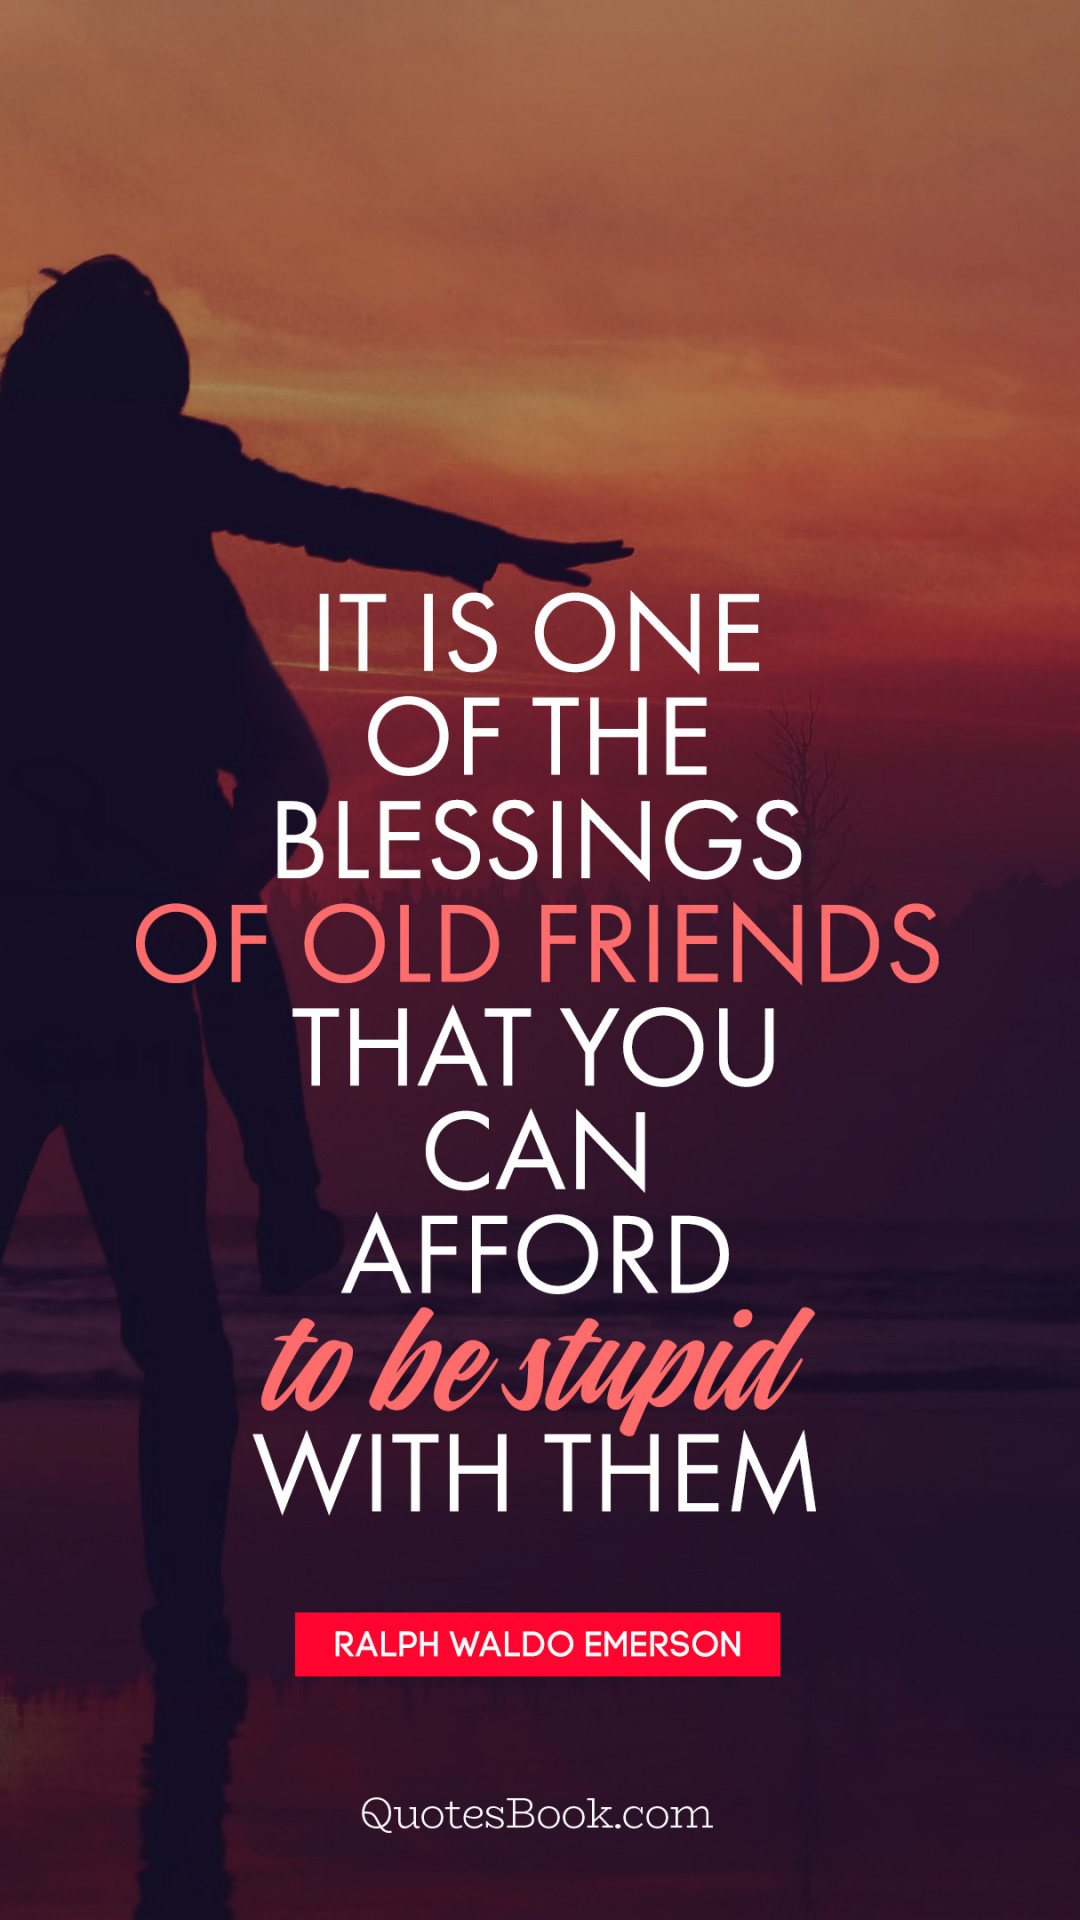 It is one of the blessings of old friends that you can afford to be